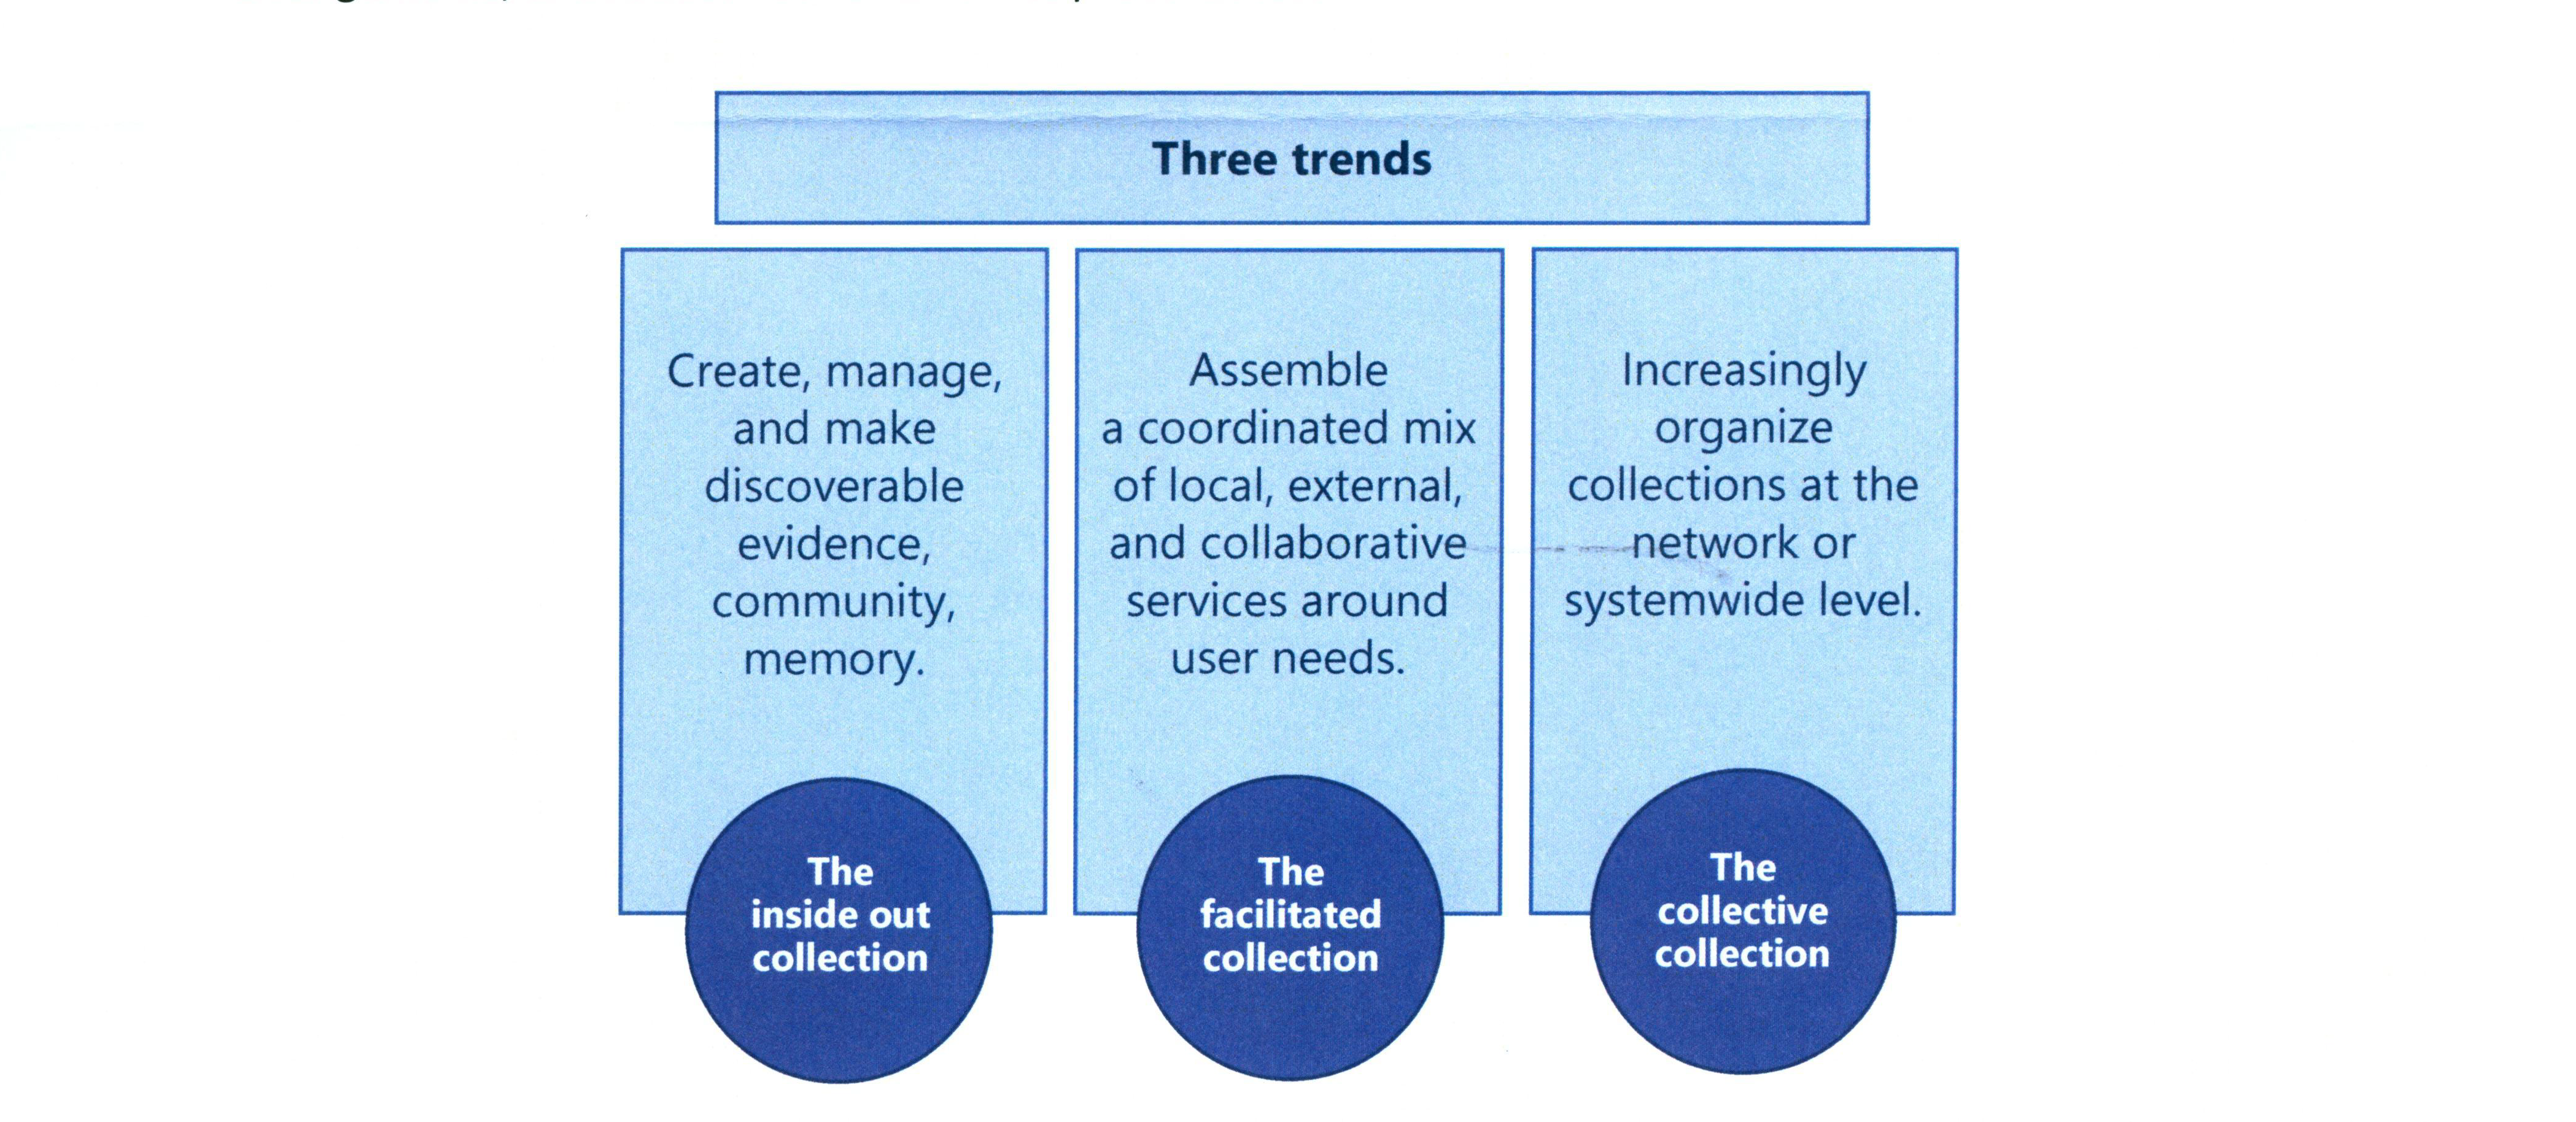 Three Trends: Inside Out - Create, manage and make discoverable evidence, community, memory. The facilitated collection - Assemble a coordinated mix of local, external, and collaborative services around user needs. The collective collection - Increasingly organize collections at the metwork or systemwide level. 